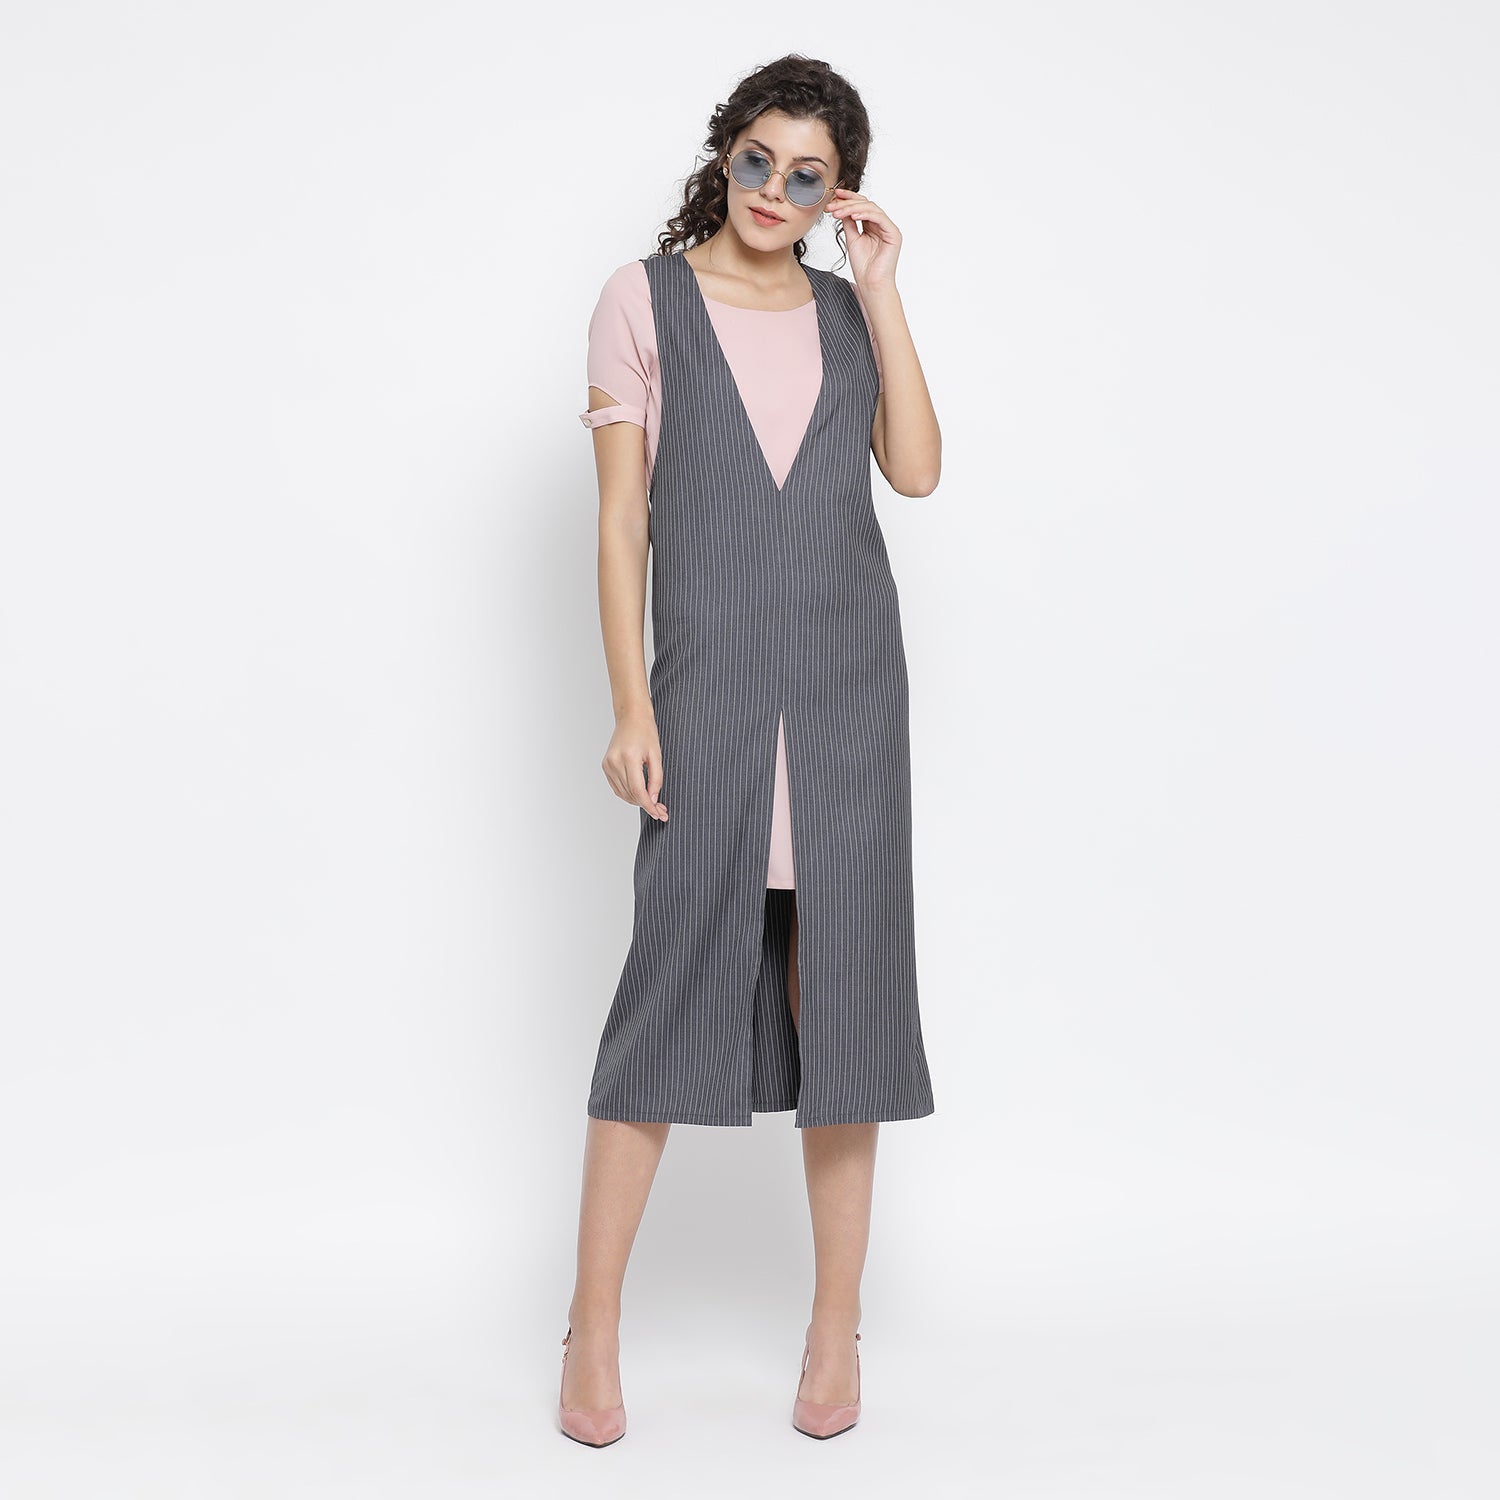 Grey Stripe Dress With Pink Georgette Tunic